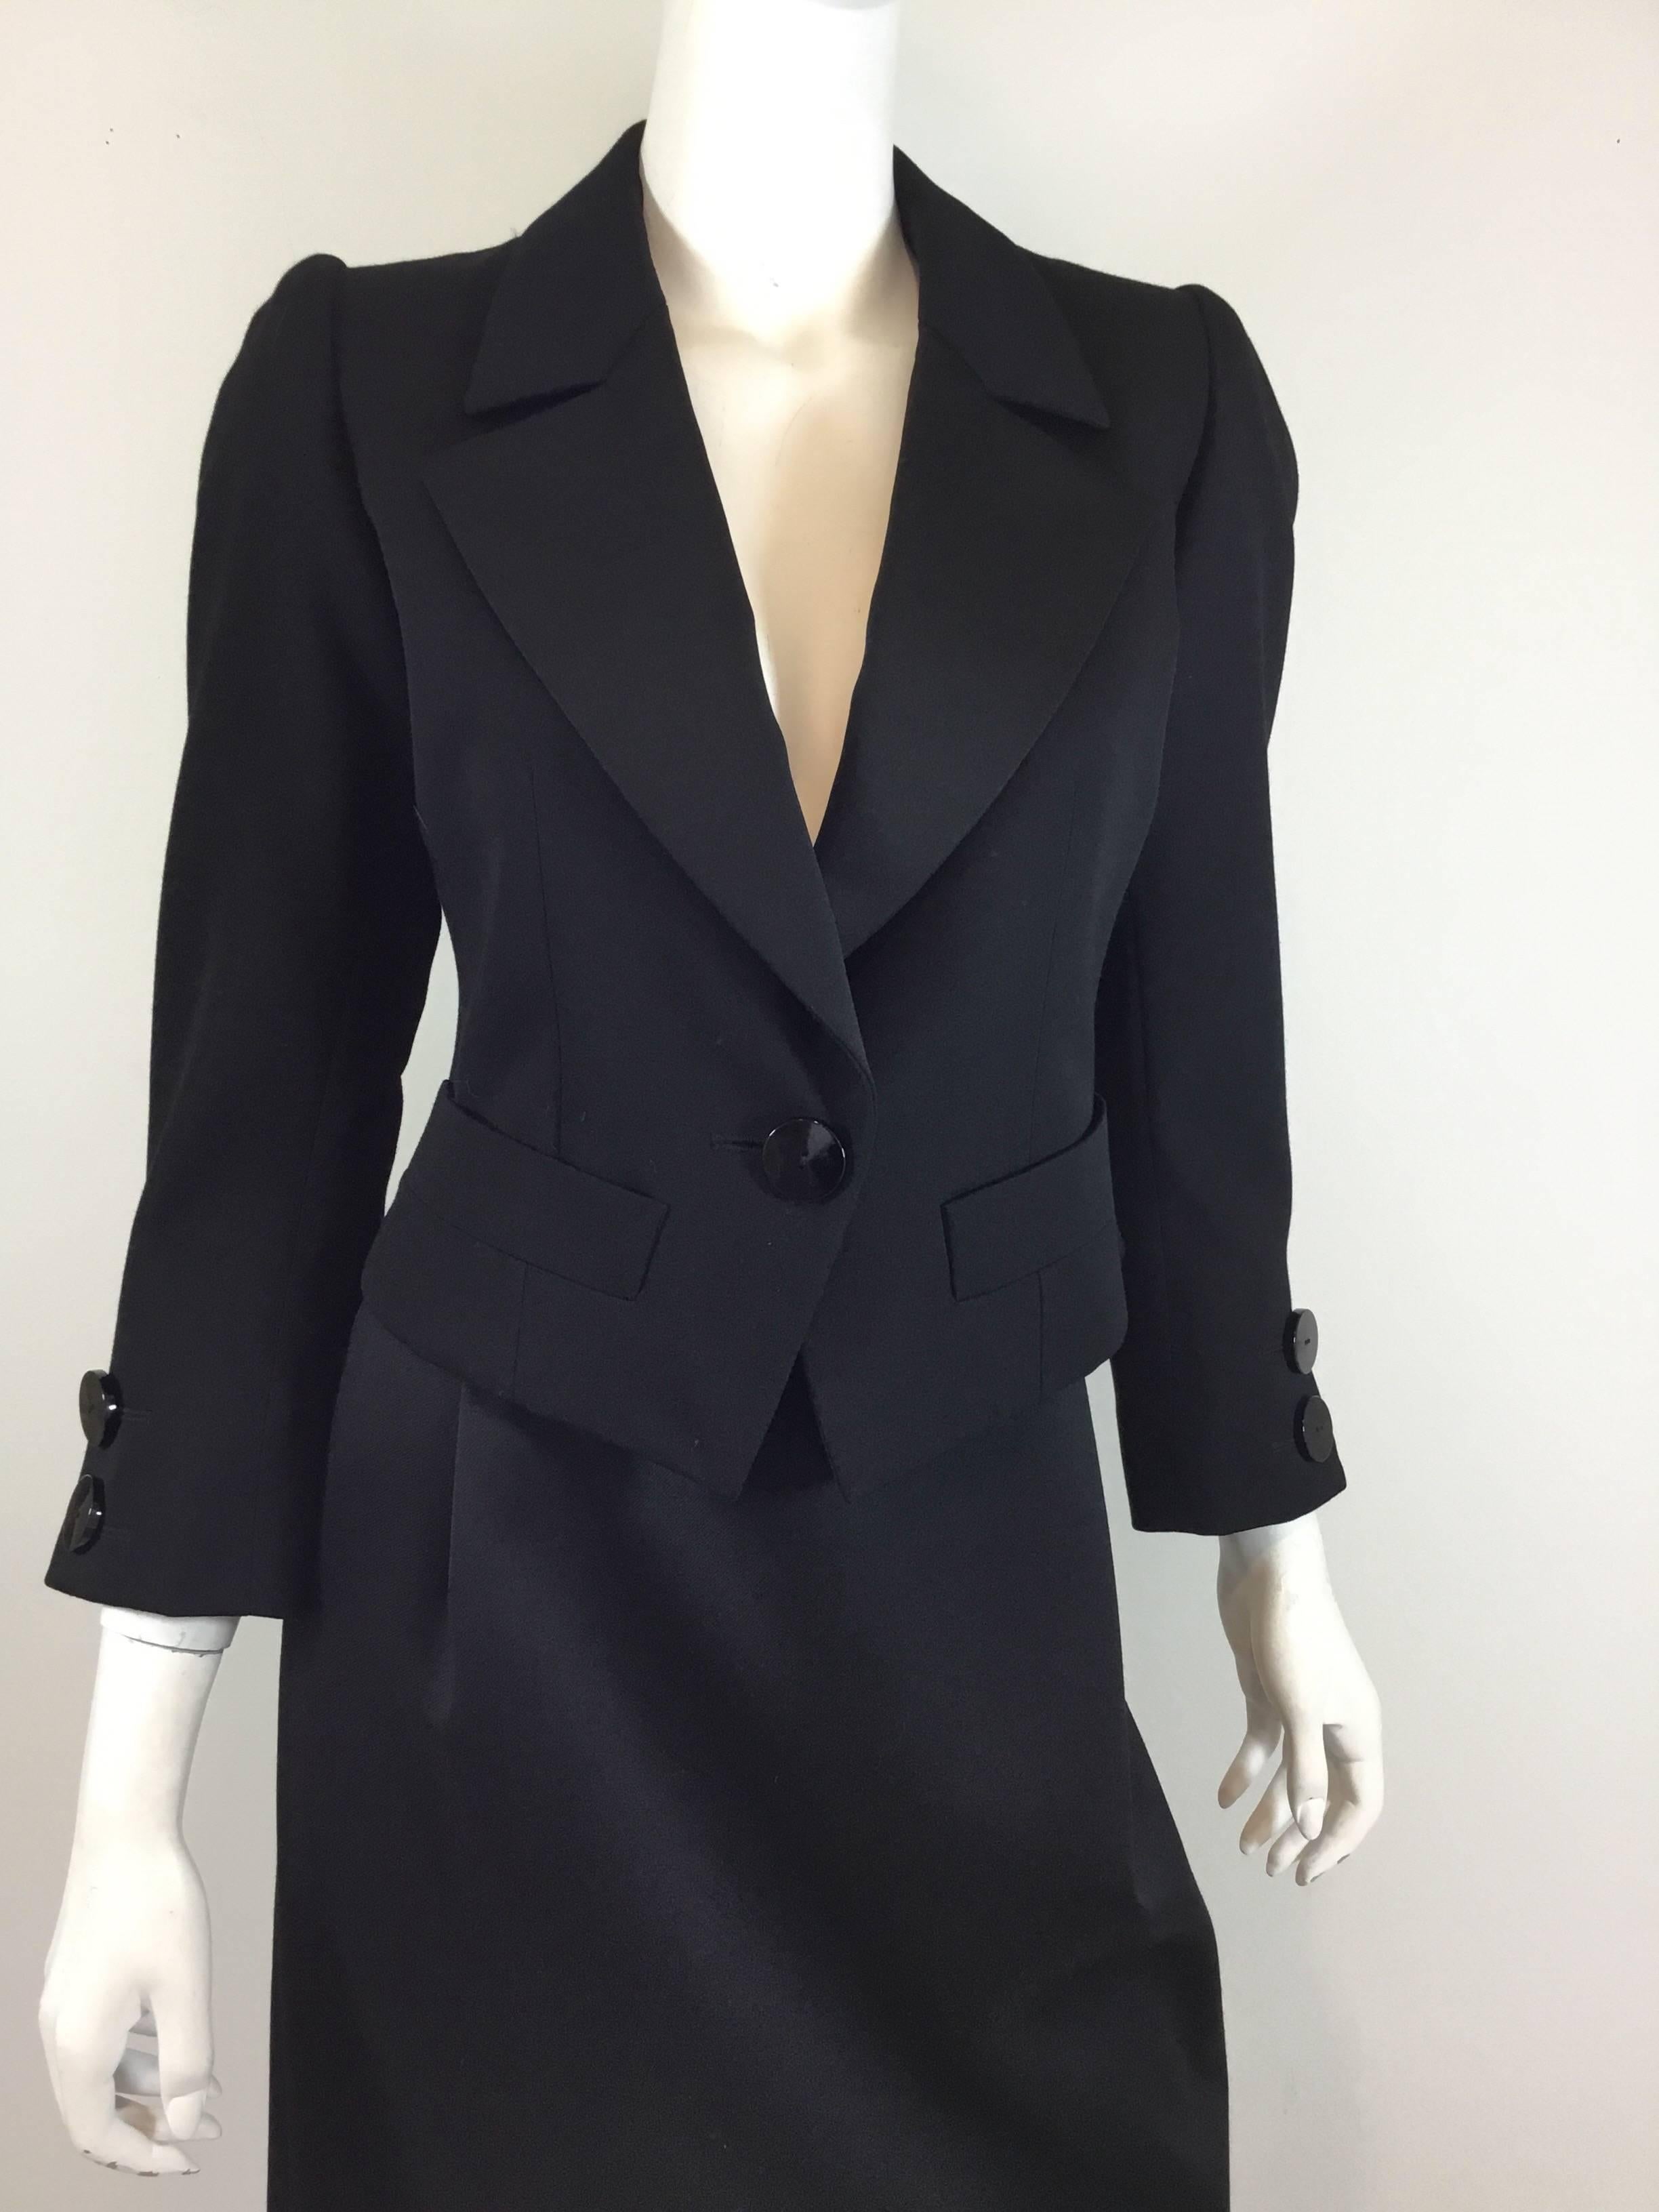 Yves Saint Laurent tuxedo jacket has a single button closure and two slip pockets at the hem. Skirt has a back zipper and button fastening. Skirt and jacket are fully lined and are composed of 100% wool. Size 36, made in France. 

Jacket- bust 36”,